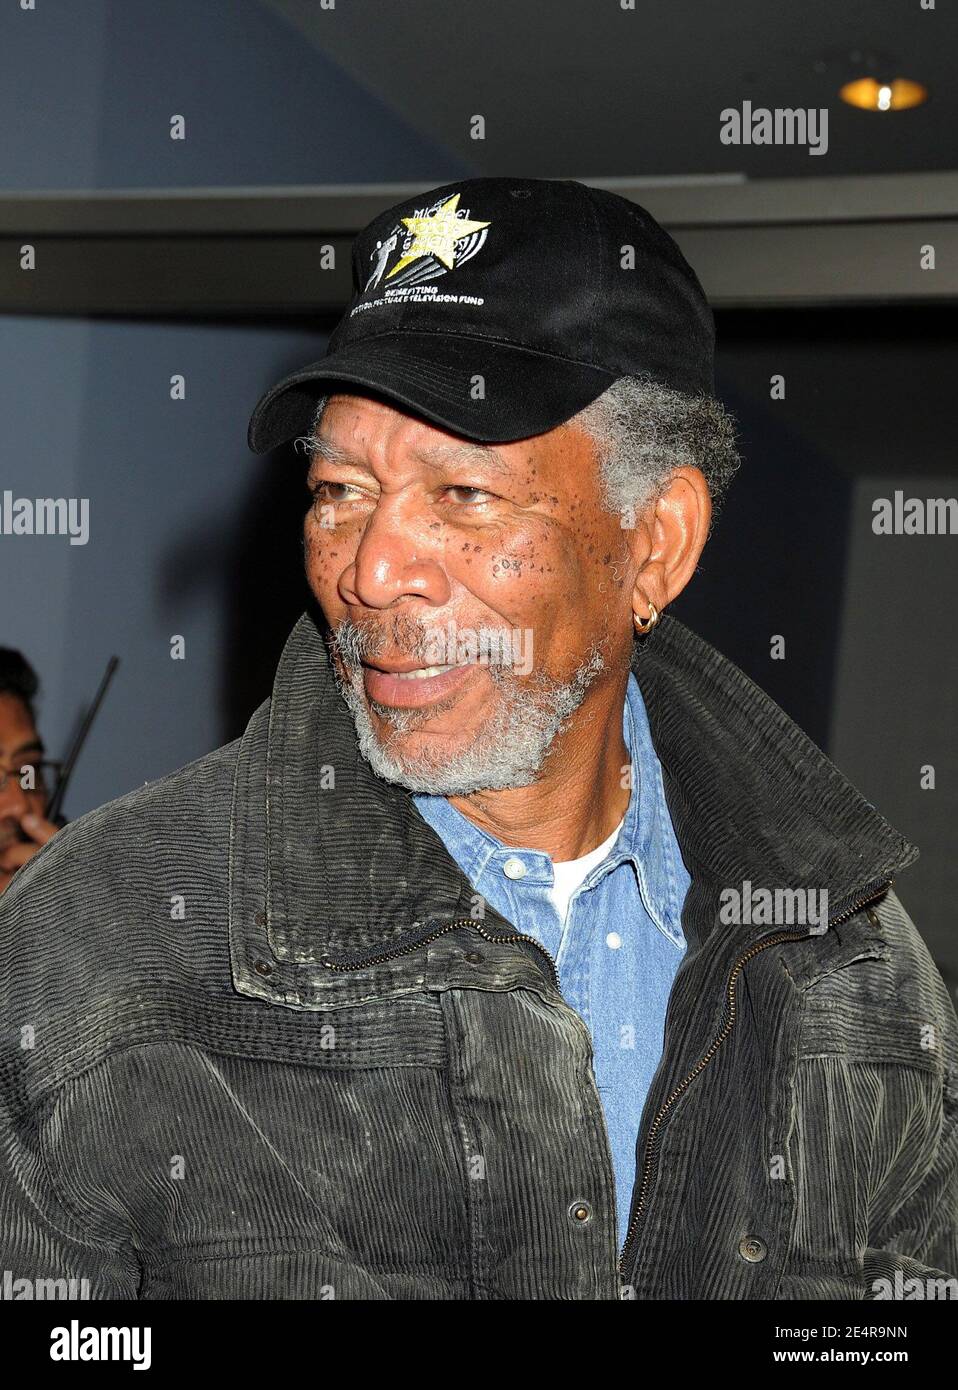 Morgan Freeman arriving for the premiere of HBO's first two parts of the  Home Box Office miniseries 'John Adams' held at The Museum of Modern Art in  New York City, NY, USA